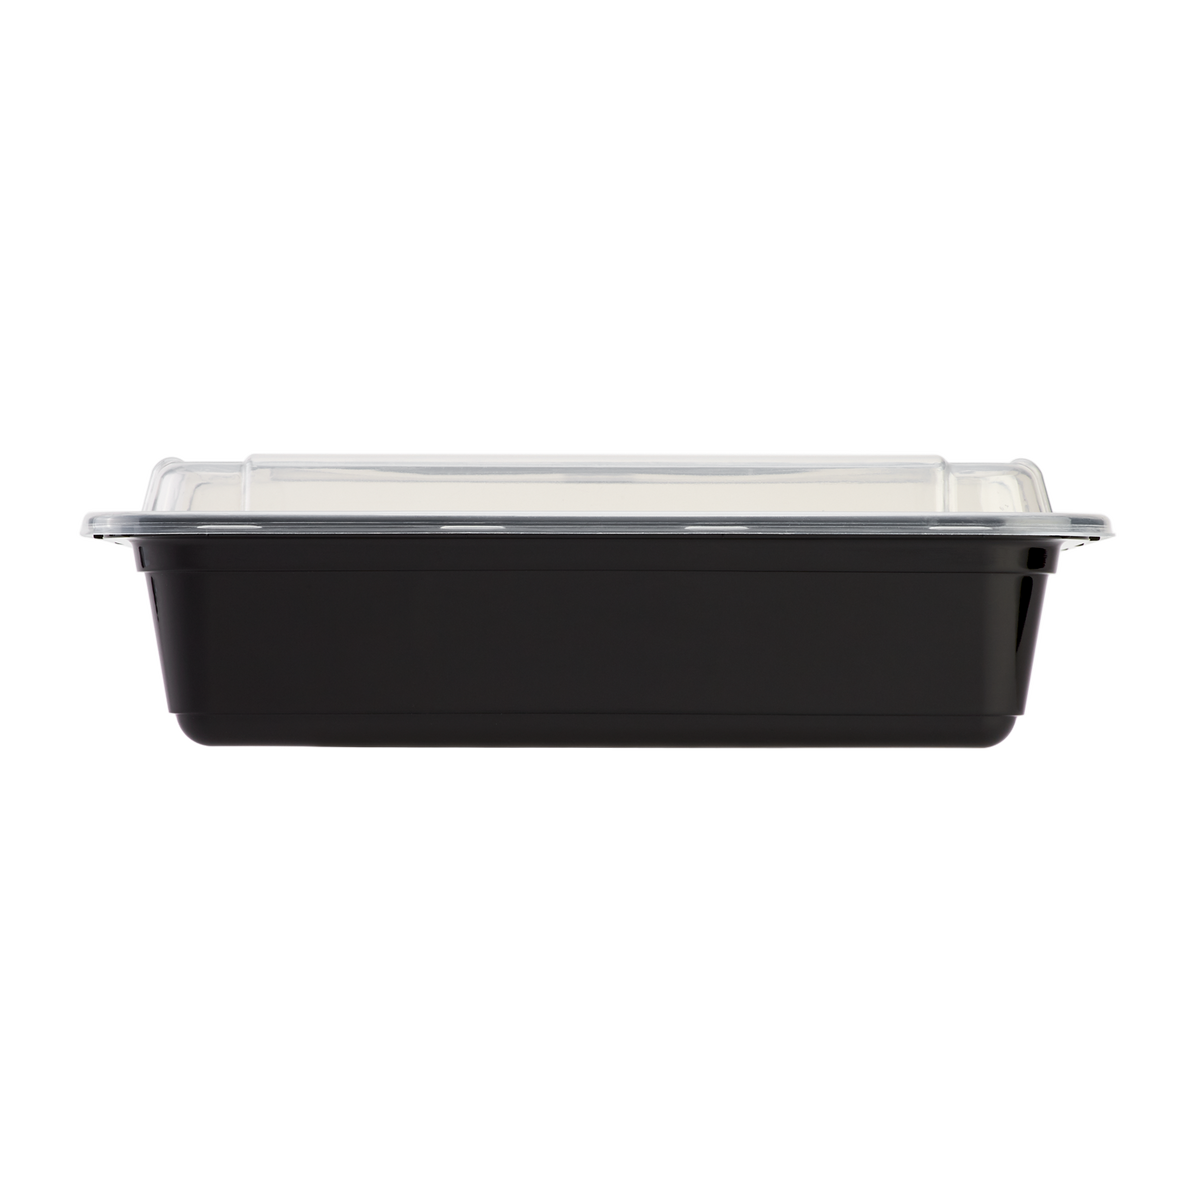 https://www.restaurantsupplydrops.shop/wp-content/uploads/1689/33/now-you-can-also-receive-the-gift-of-surprise-when-you-purchase-38oz-meal-prep-containers-microwavable-rectangular-food-containers-lids-black-150-ct-karat_2.png